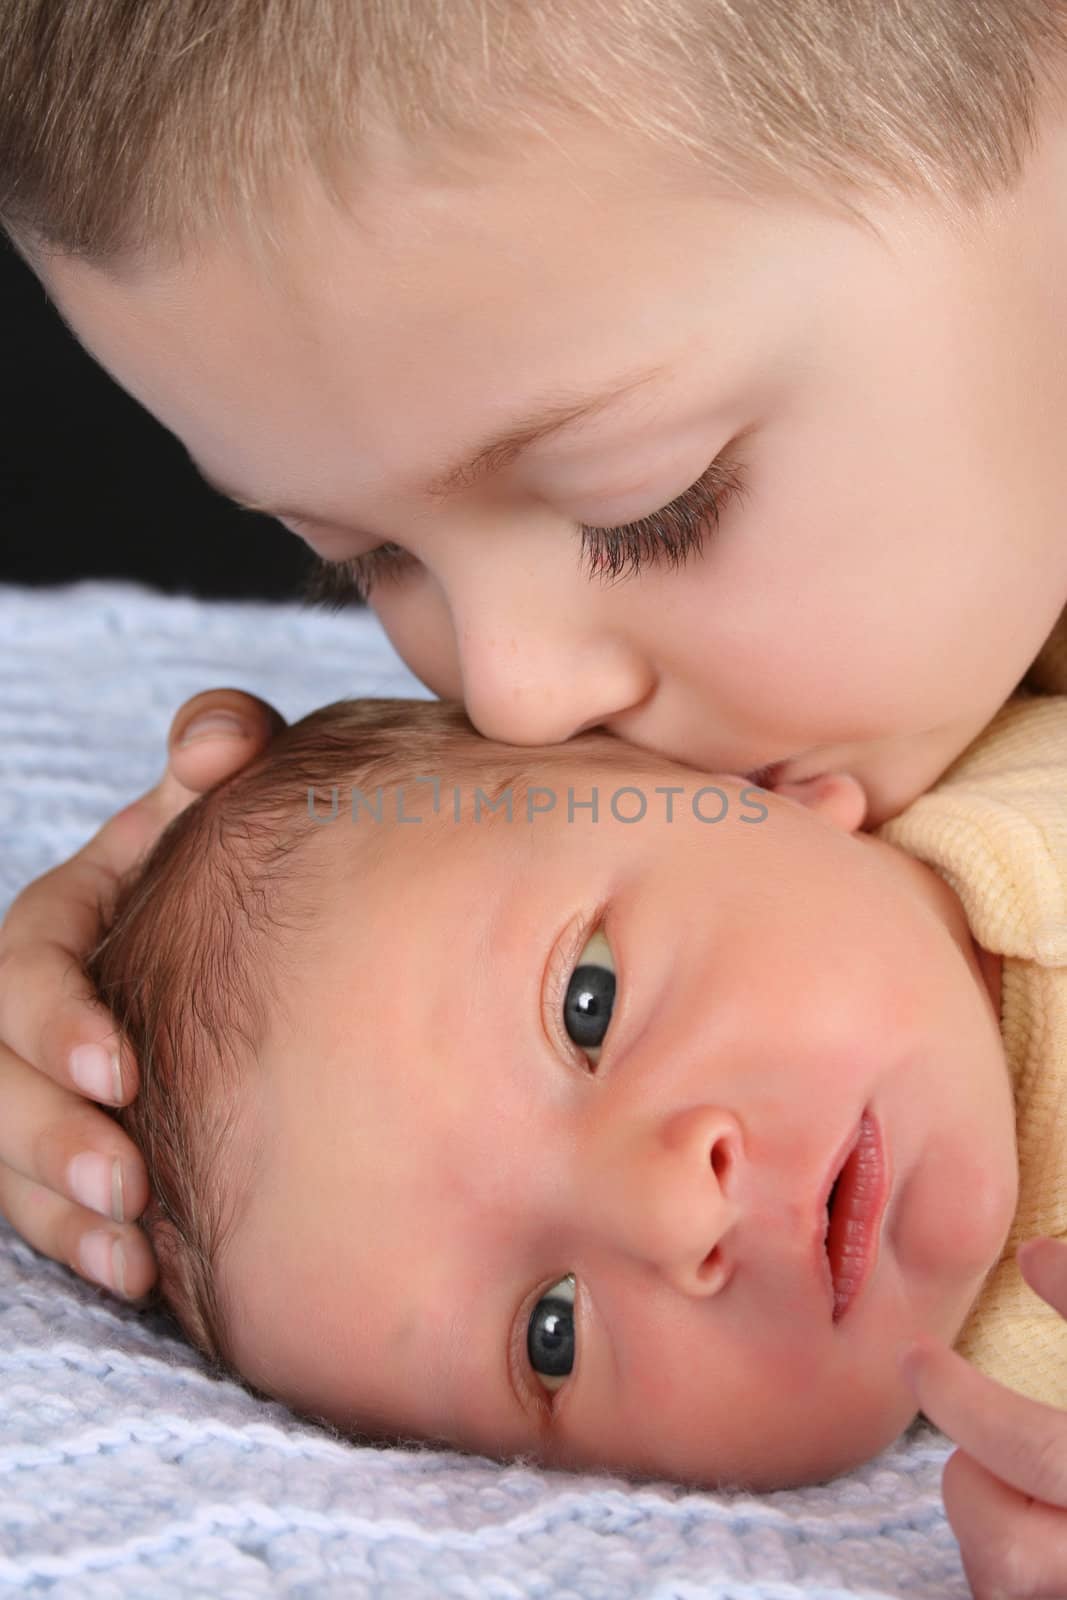 Blond boy with his newborn baby brother